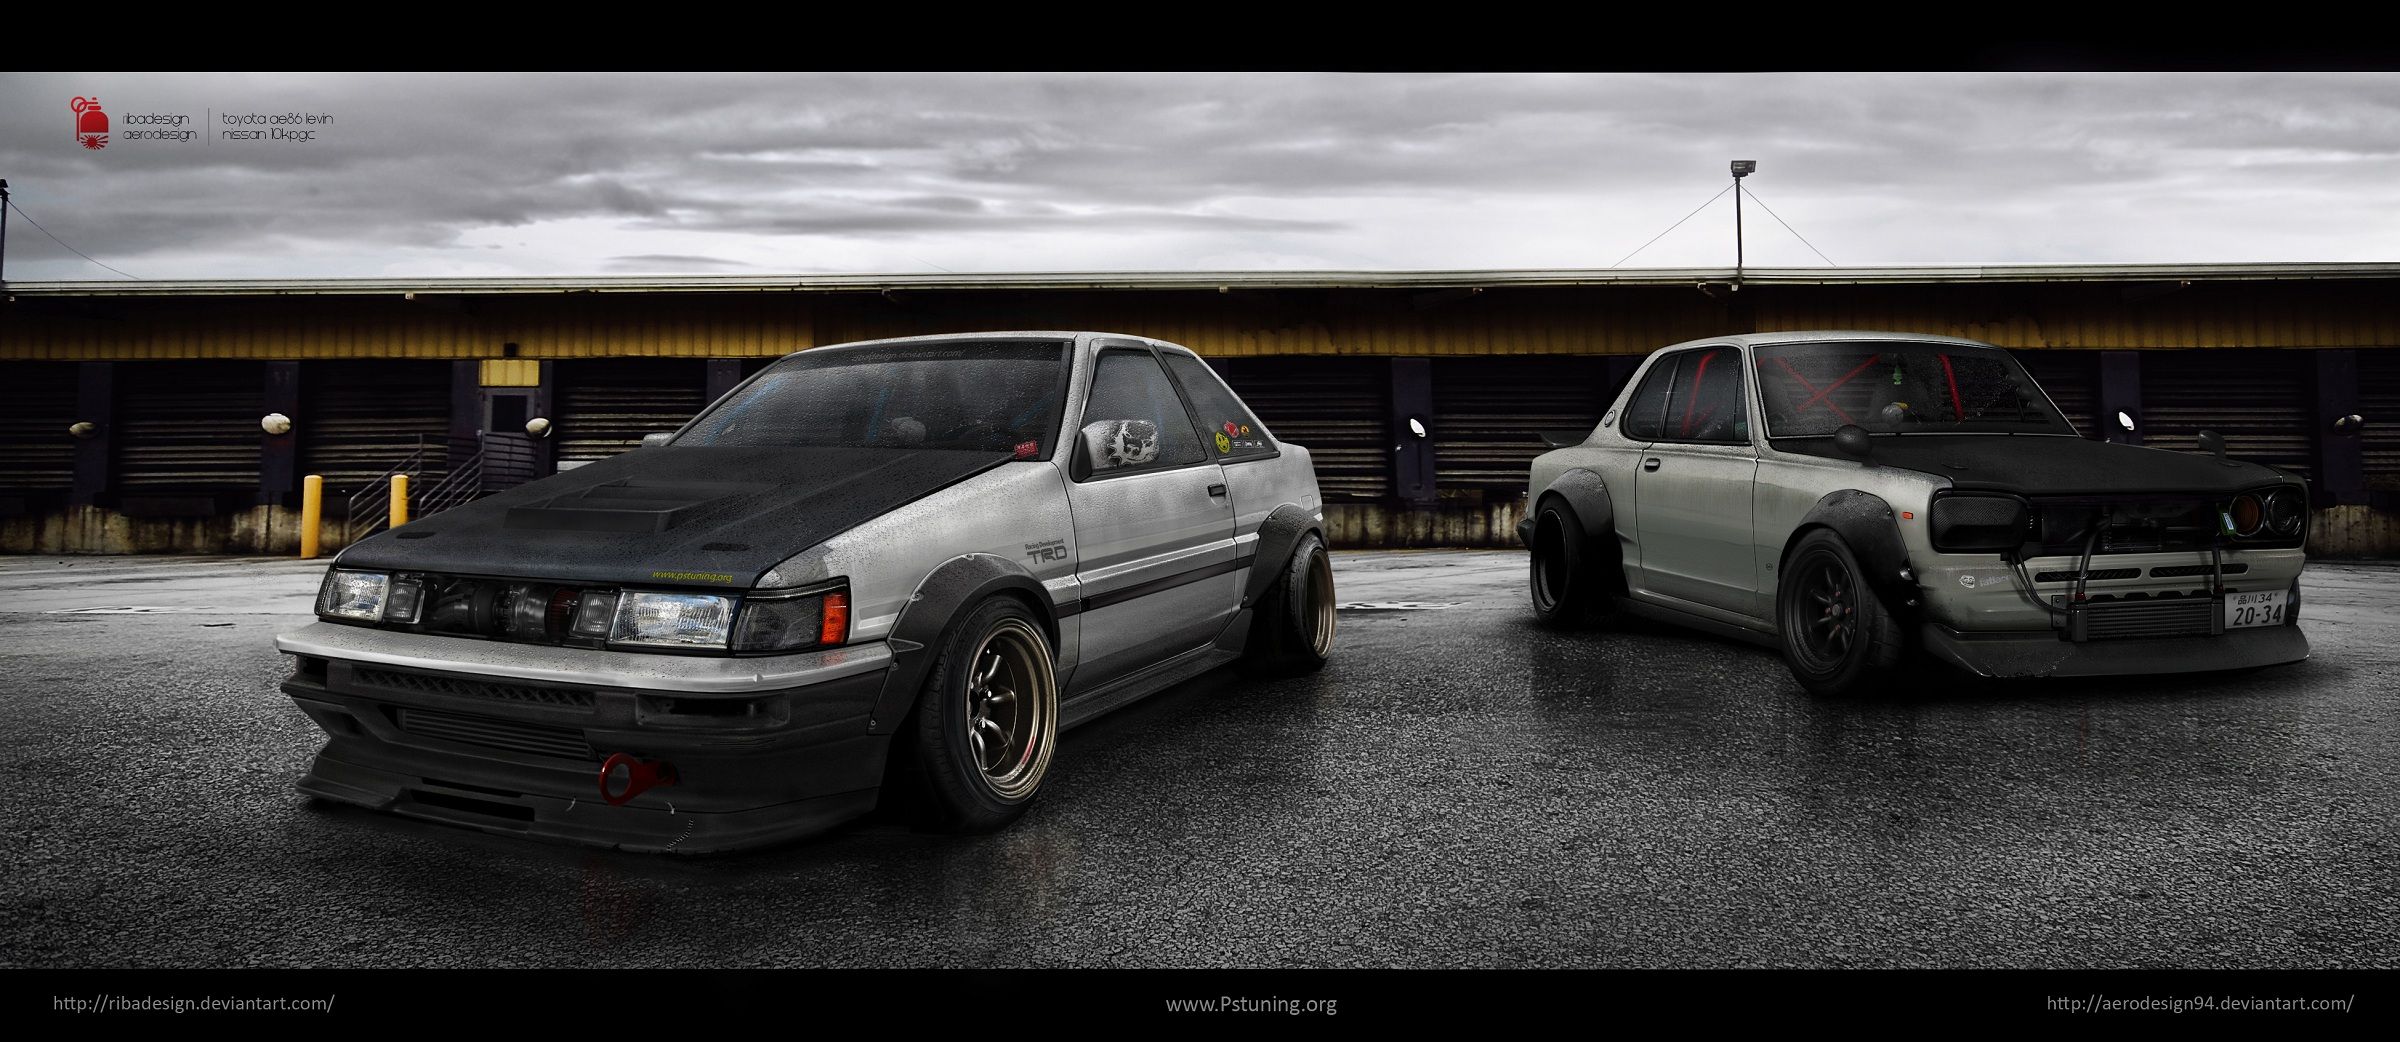 Free download Toyota Ae86 Wallpaper Toyota Ae86 Levin Nissan [2400x1042] for your Desktop, Mobile & Tablet. Explore AE86 Drift Wallpaper. AE86 Drift Wallpaper, Drift Wallpaper, Toyota AE86 Wallpaper